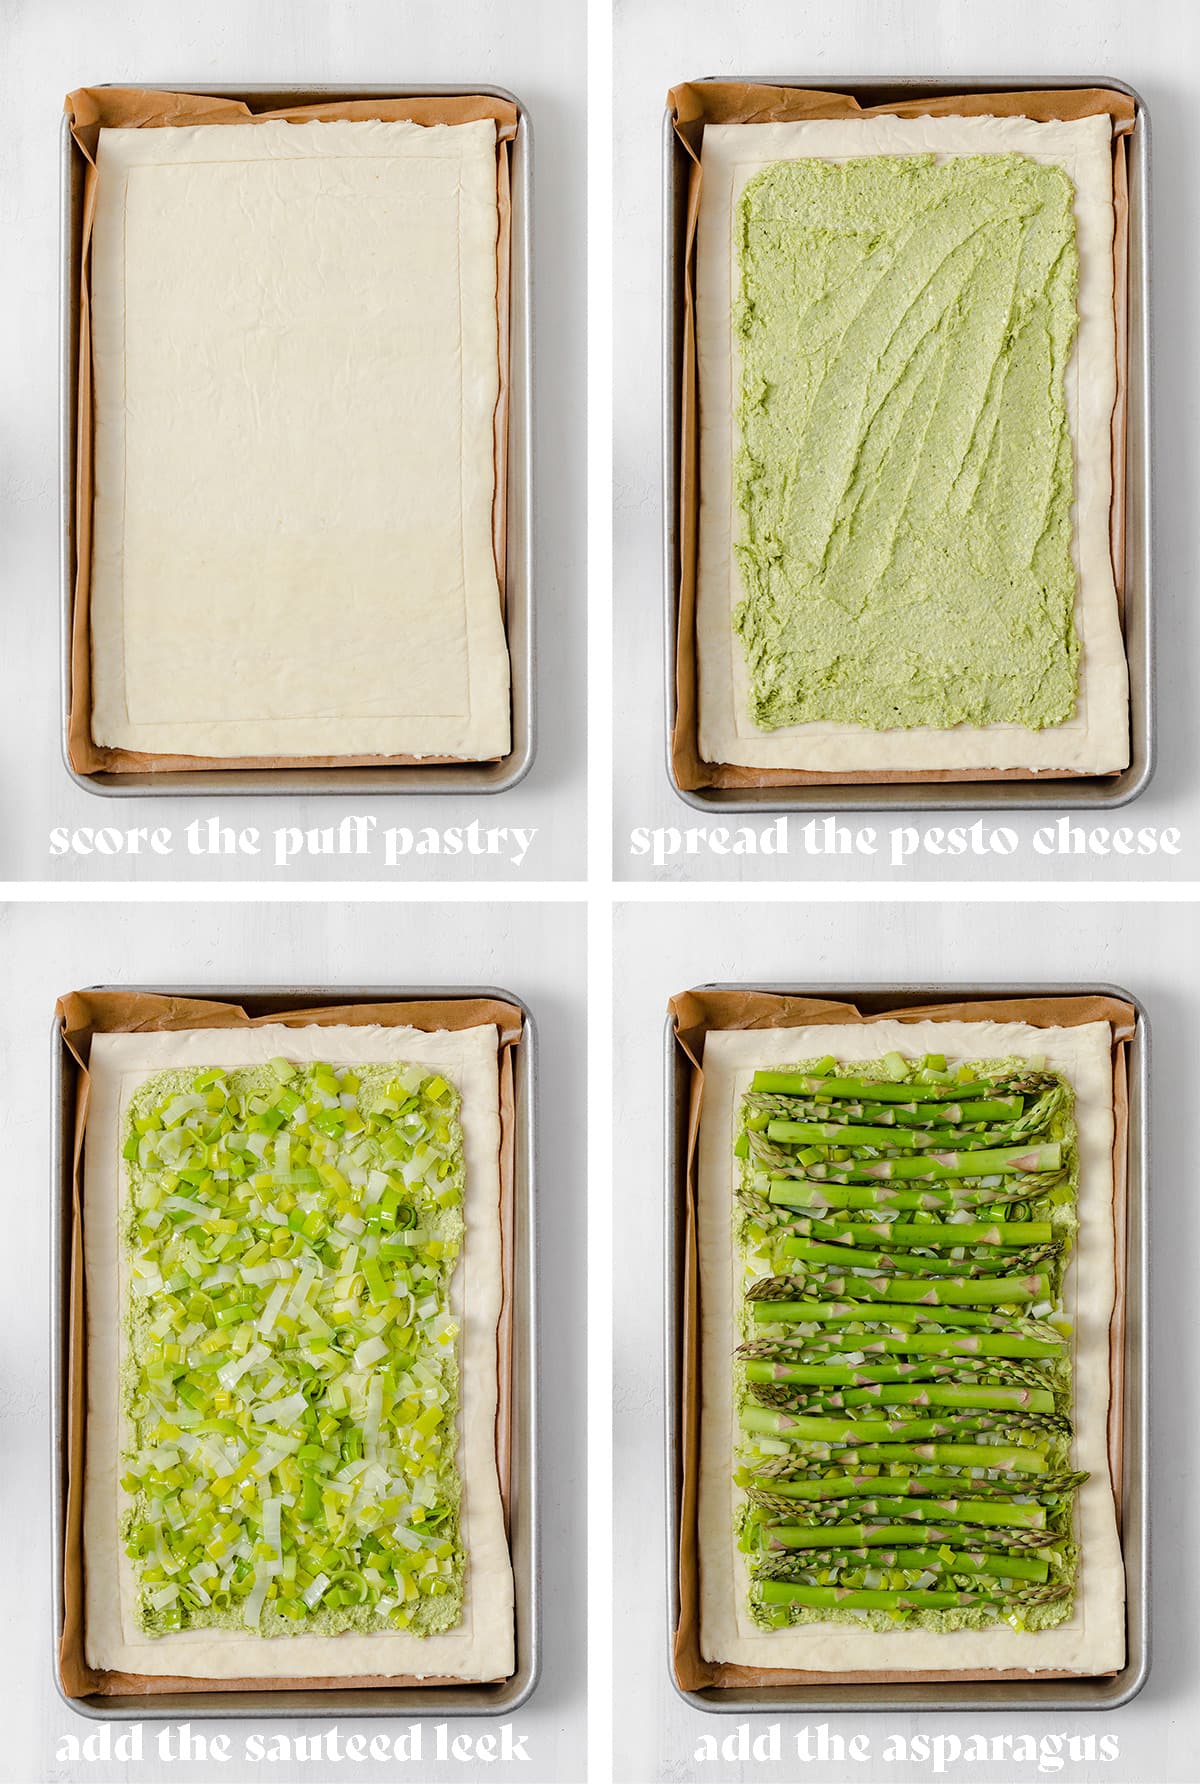 Step by step photos of how to make asparagus leek tart. Puff pastry on a baking sheet with toppings.